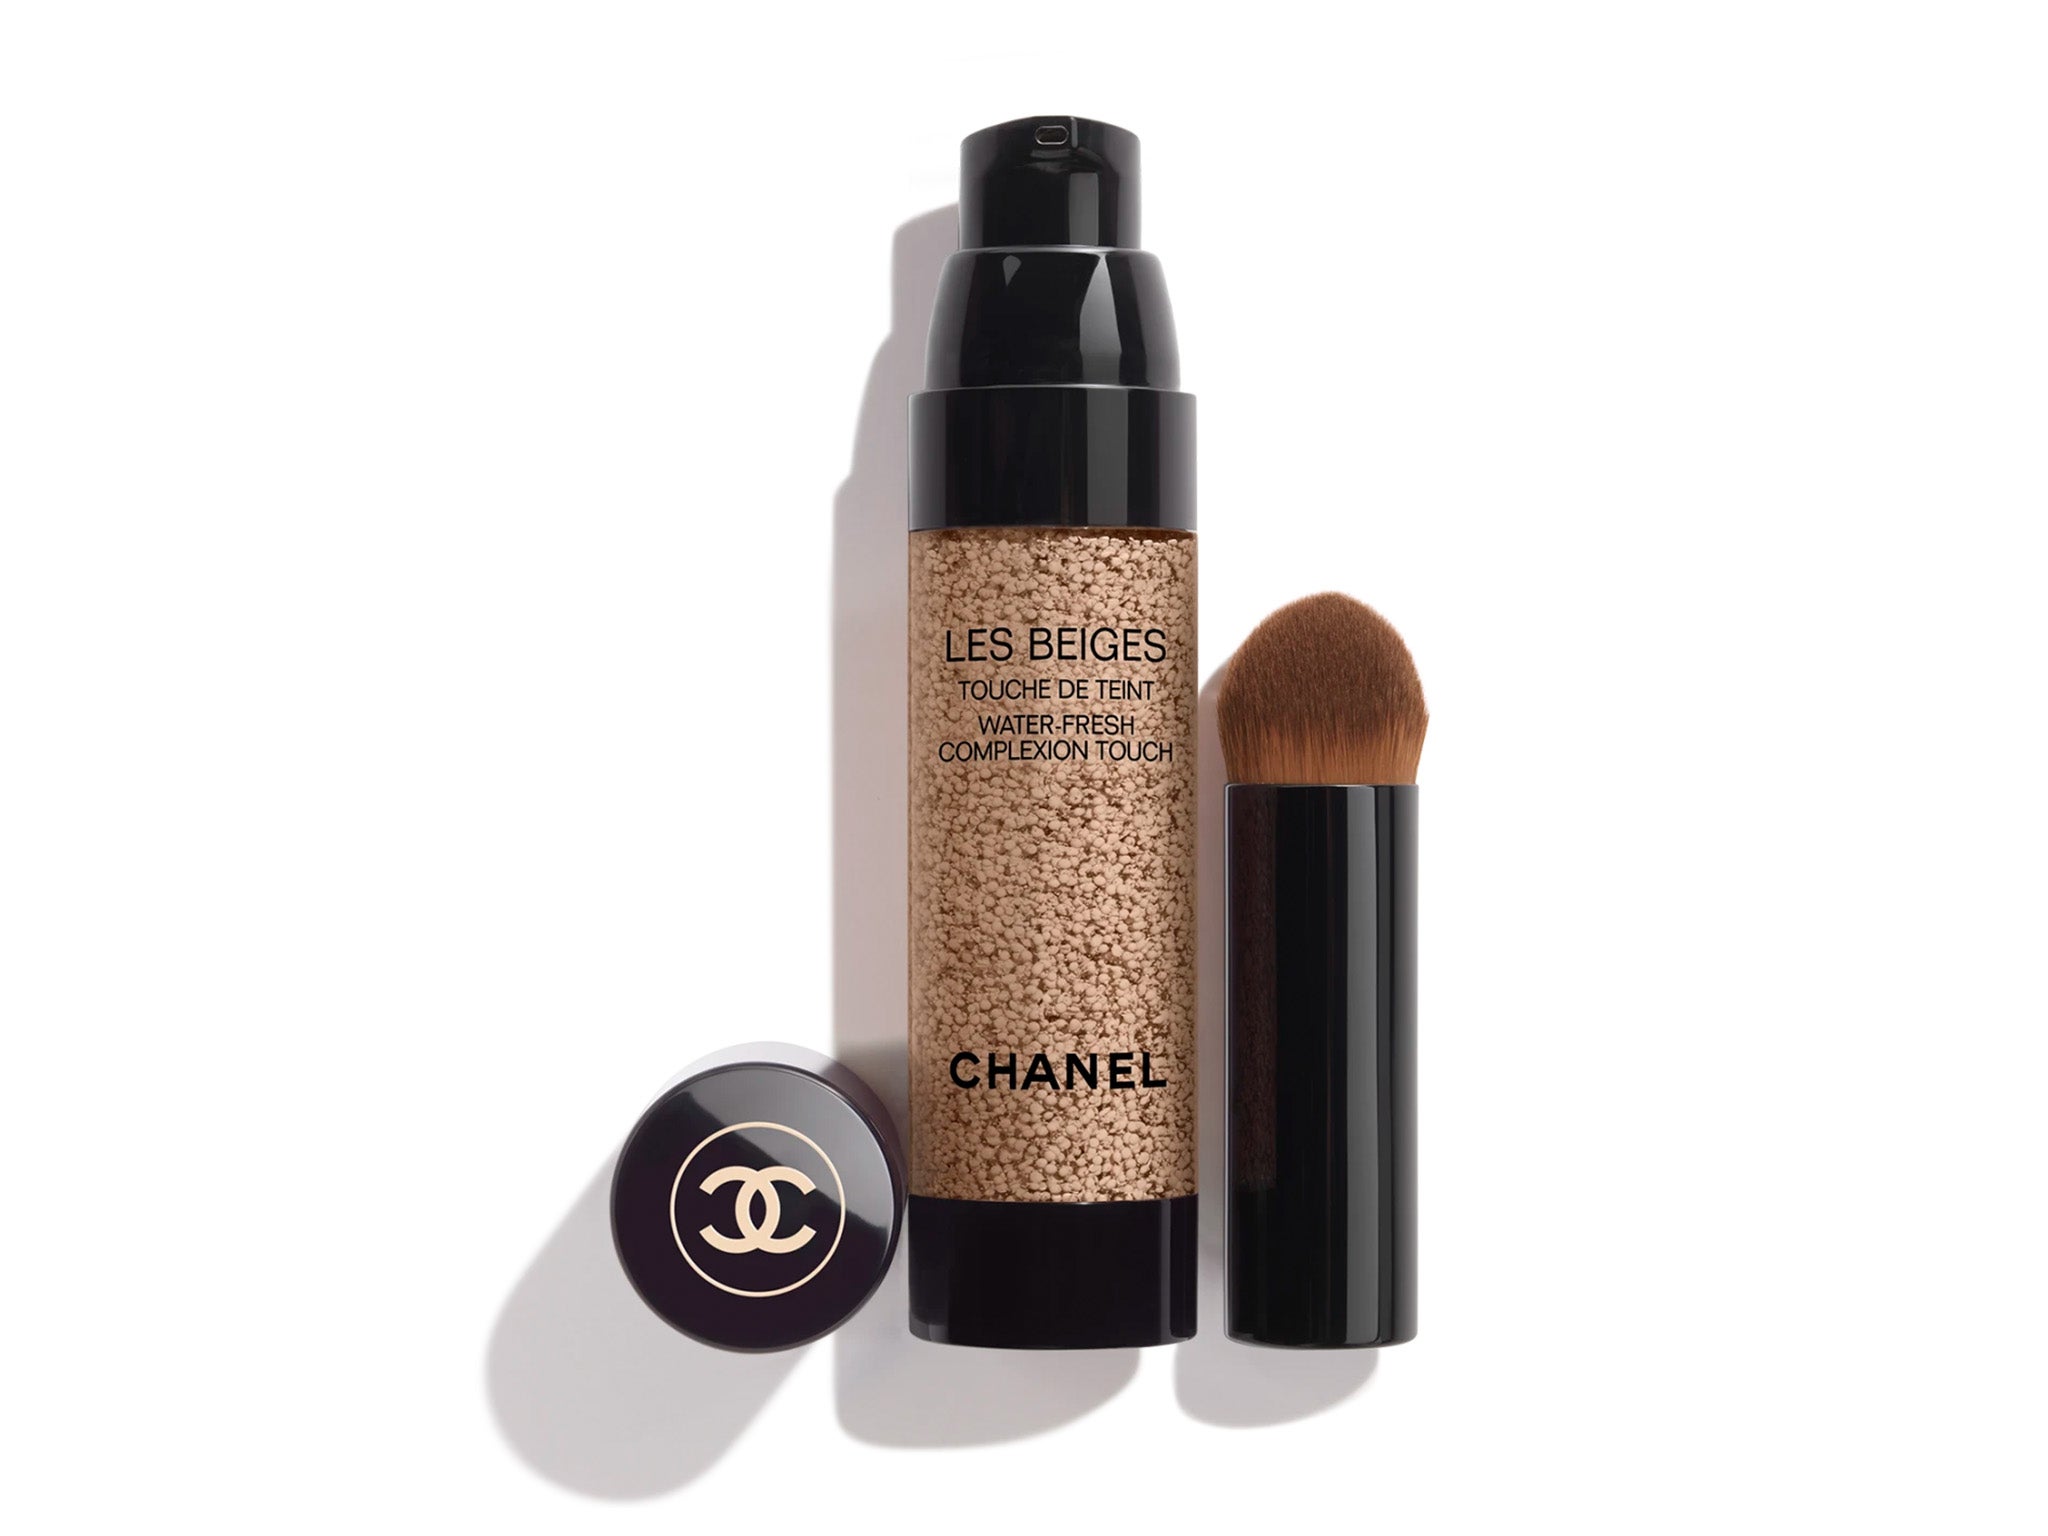 Chanel Les Beiges Water Fresh Complexion Touch & Blush! 